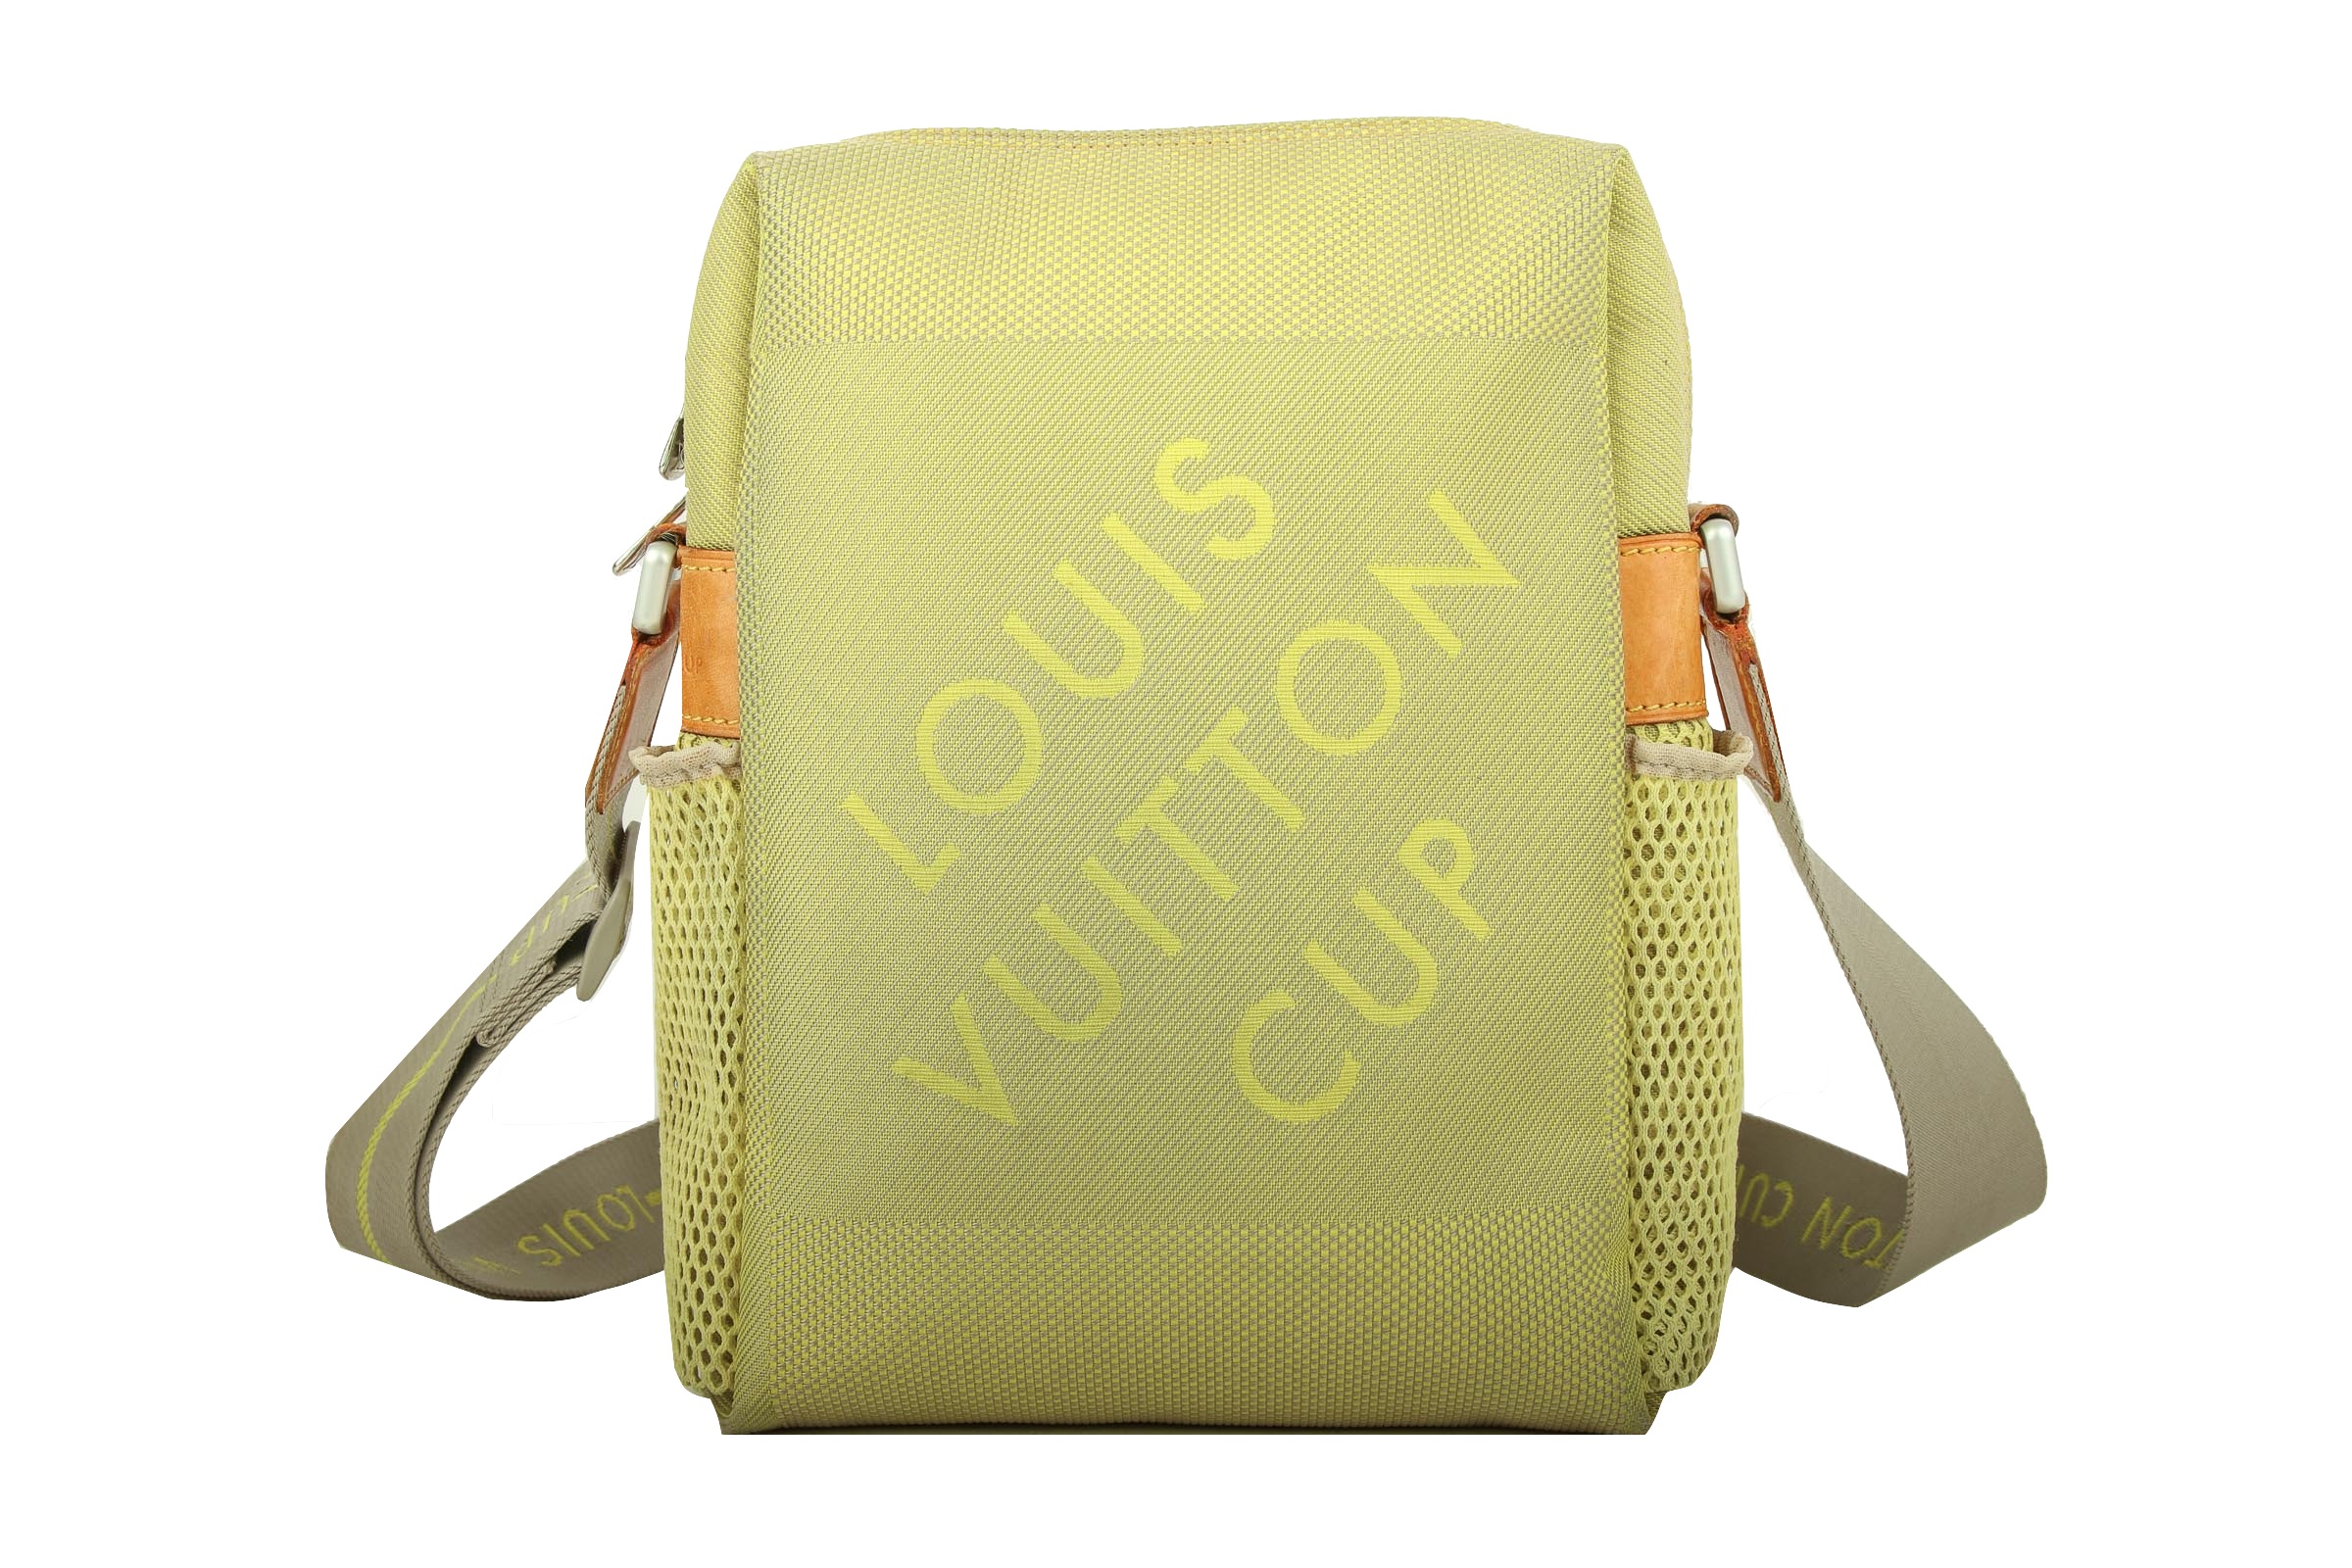 Louis Vuitton Cup Weatherly Bag 2003 Auckland | nrd.kbic-nsn.gov